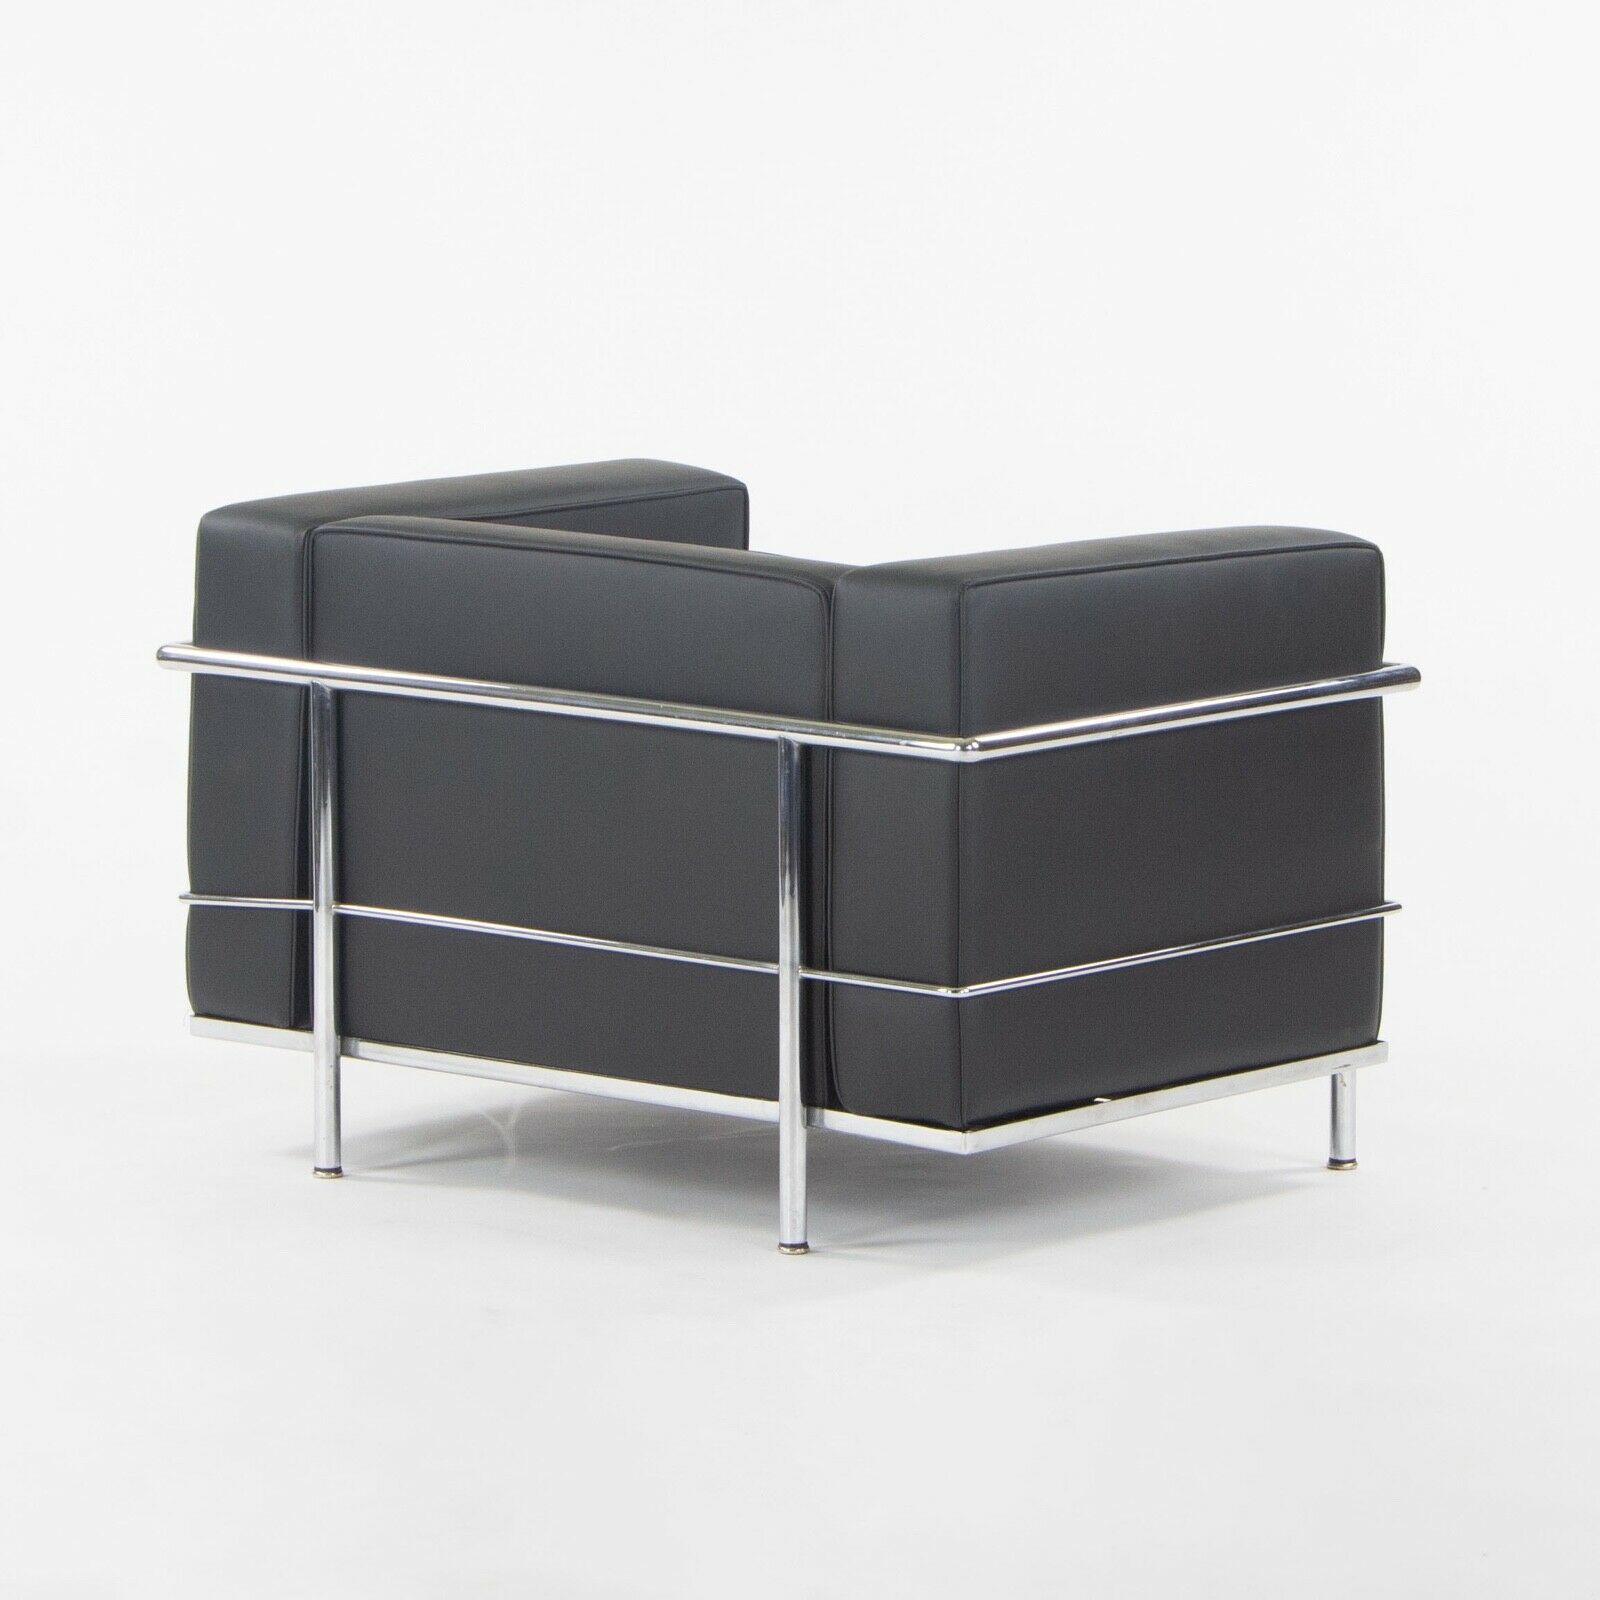 SOLD 1980s Pair of Cassina Le Corbusier LC3 Lounge Chairs with New Black Upholstery